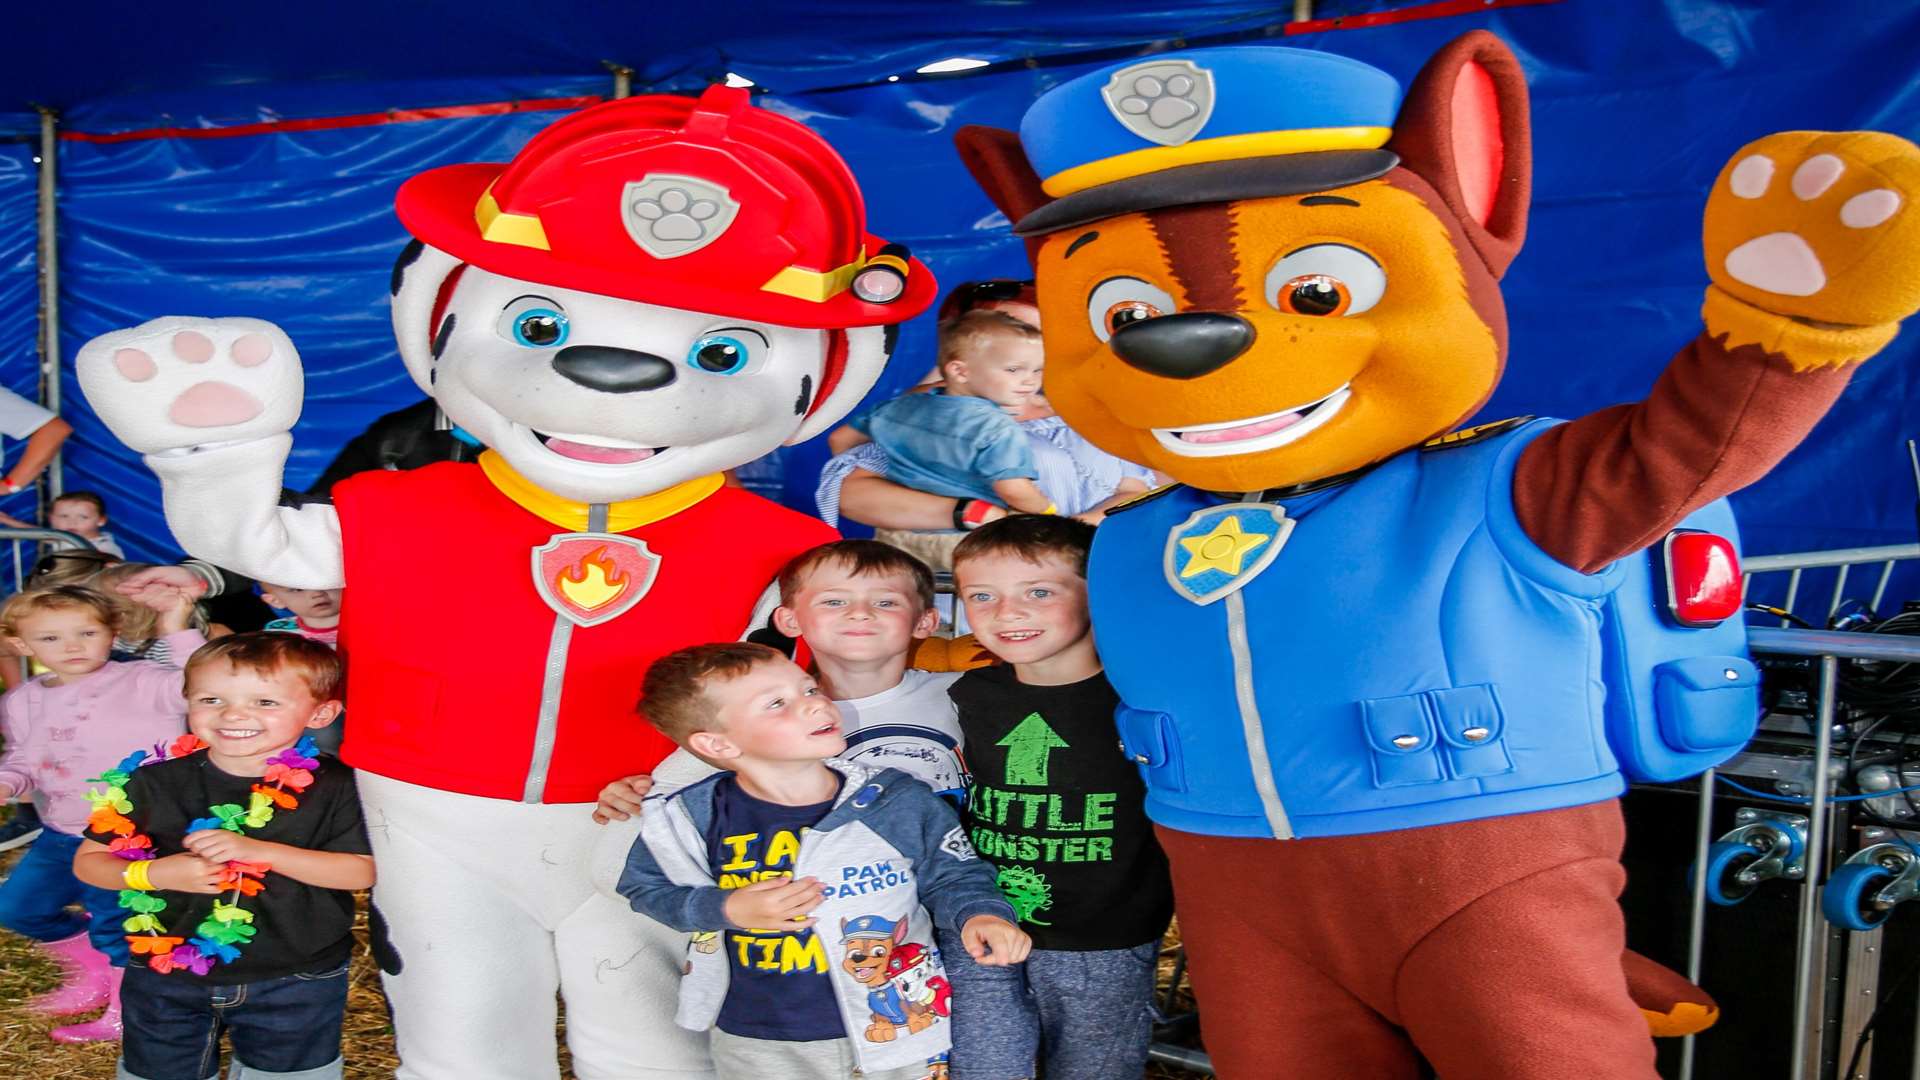 Last year's festival included a visit from Chase and Marshall of Paw Patrol